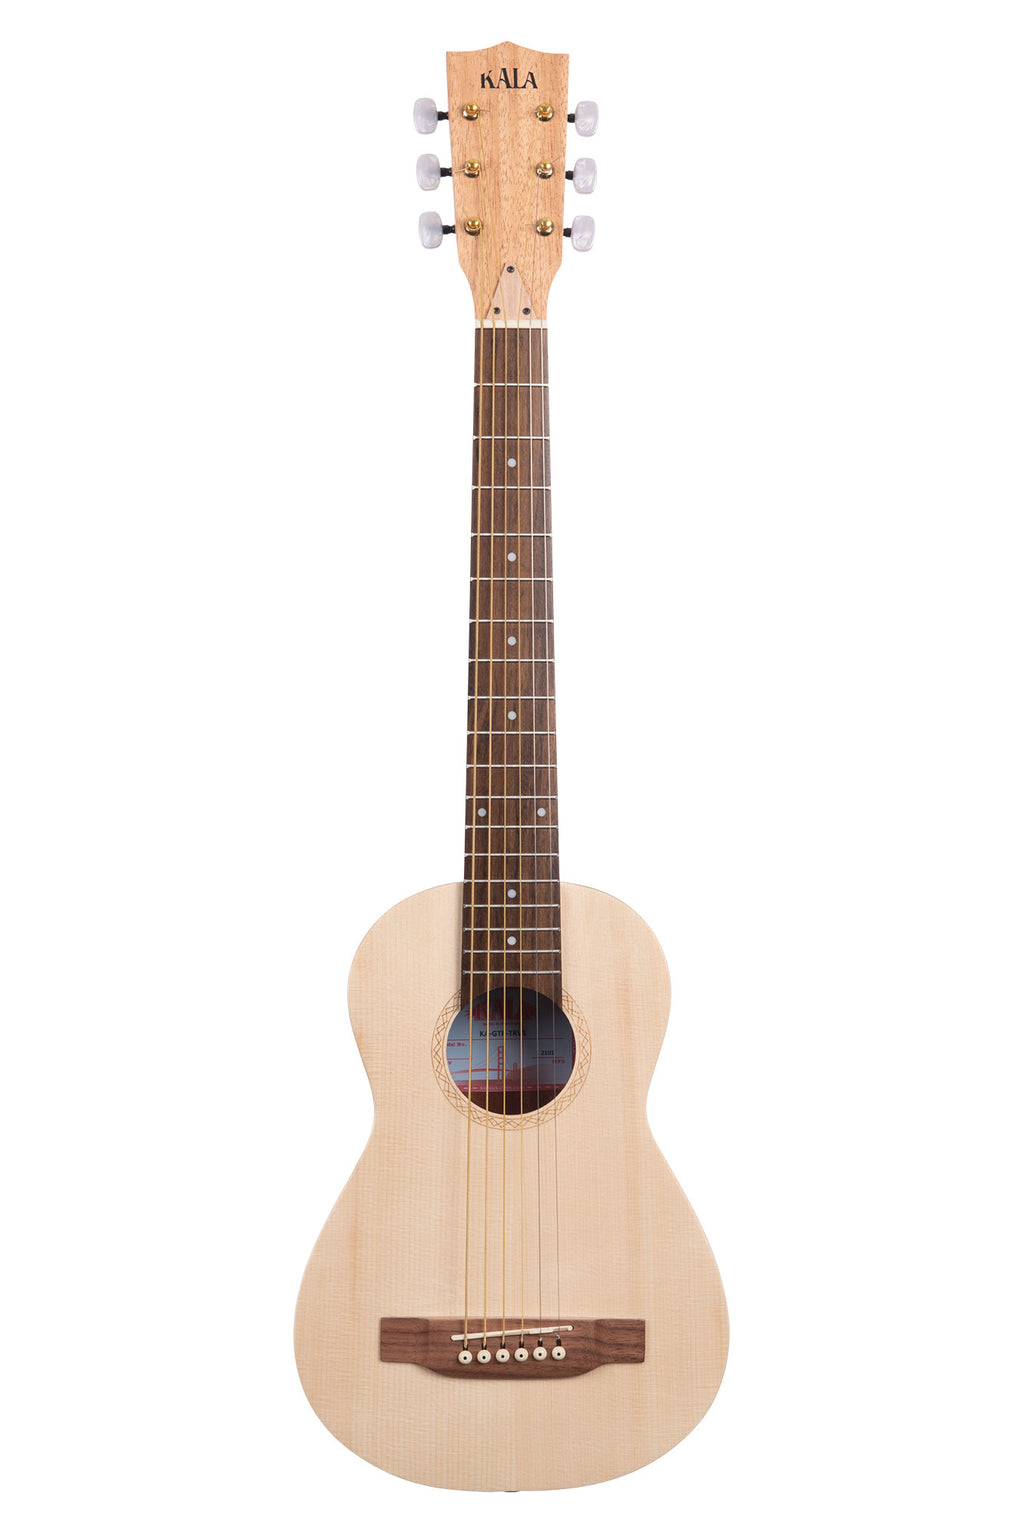 Solid Spruce Top Travel Guitar with Steel Strings - Kala Brand Music Co.™